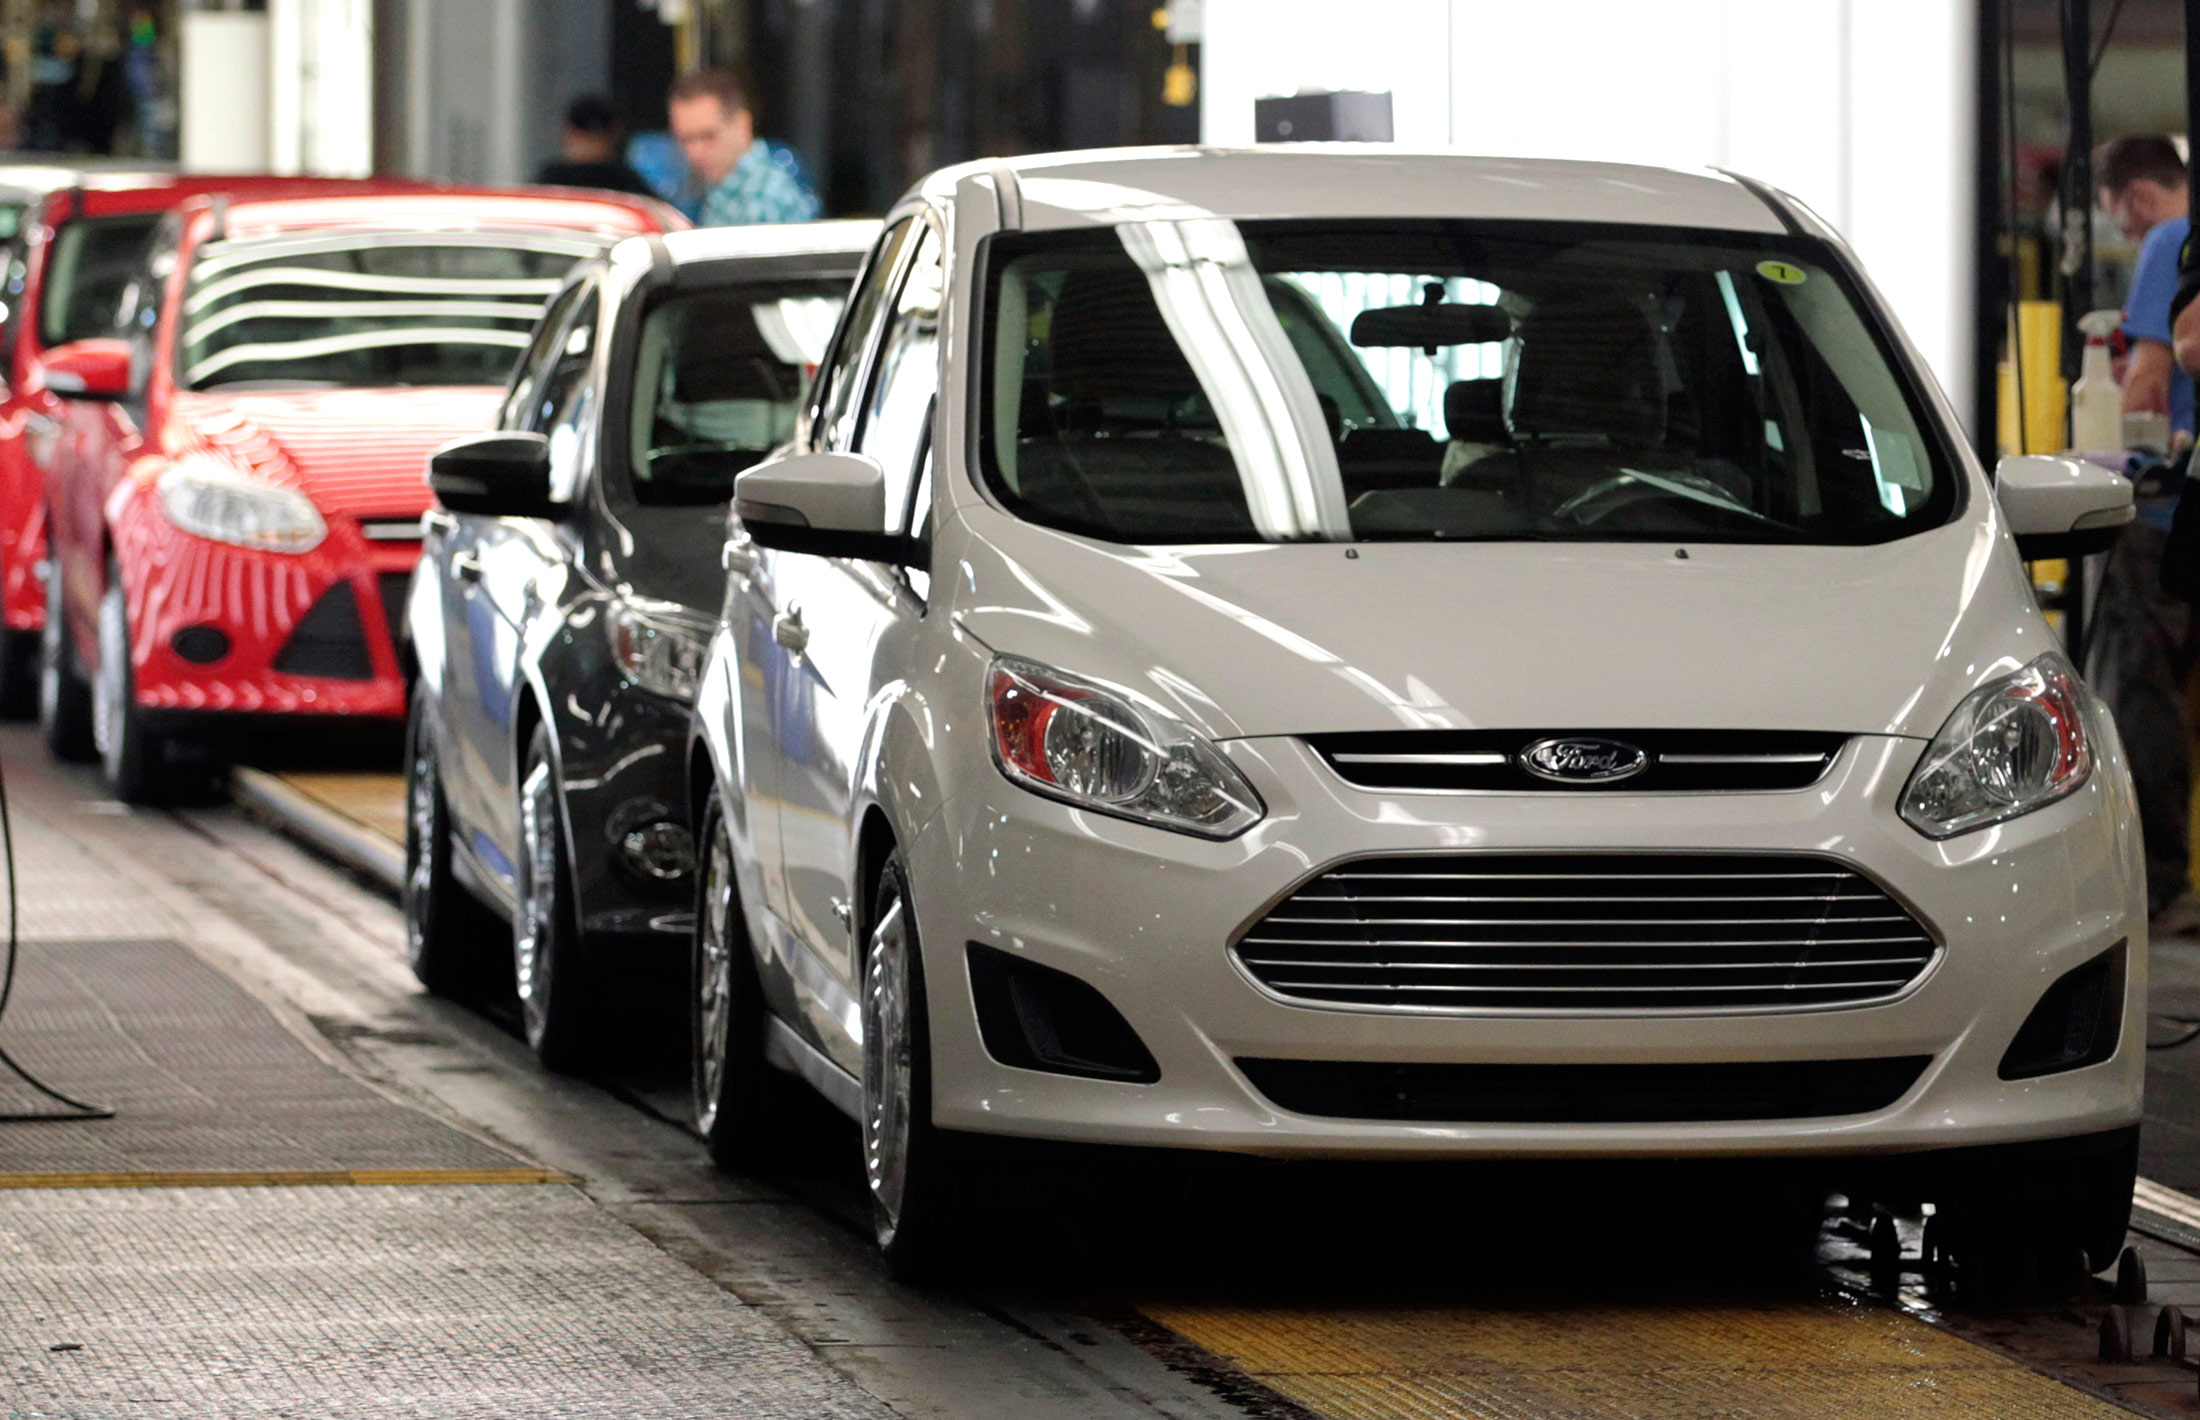 Ford Motor Co. C-Max hybrid cars reach the end of the production line at the company's Michigan Assembly Plant in Wayne, Michigan.
